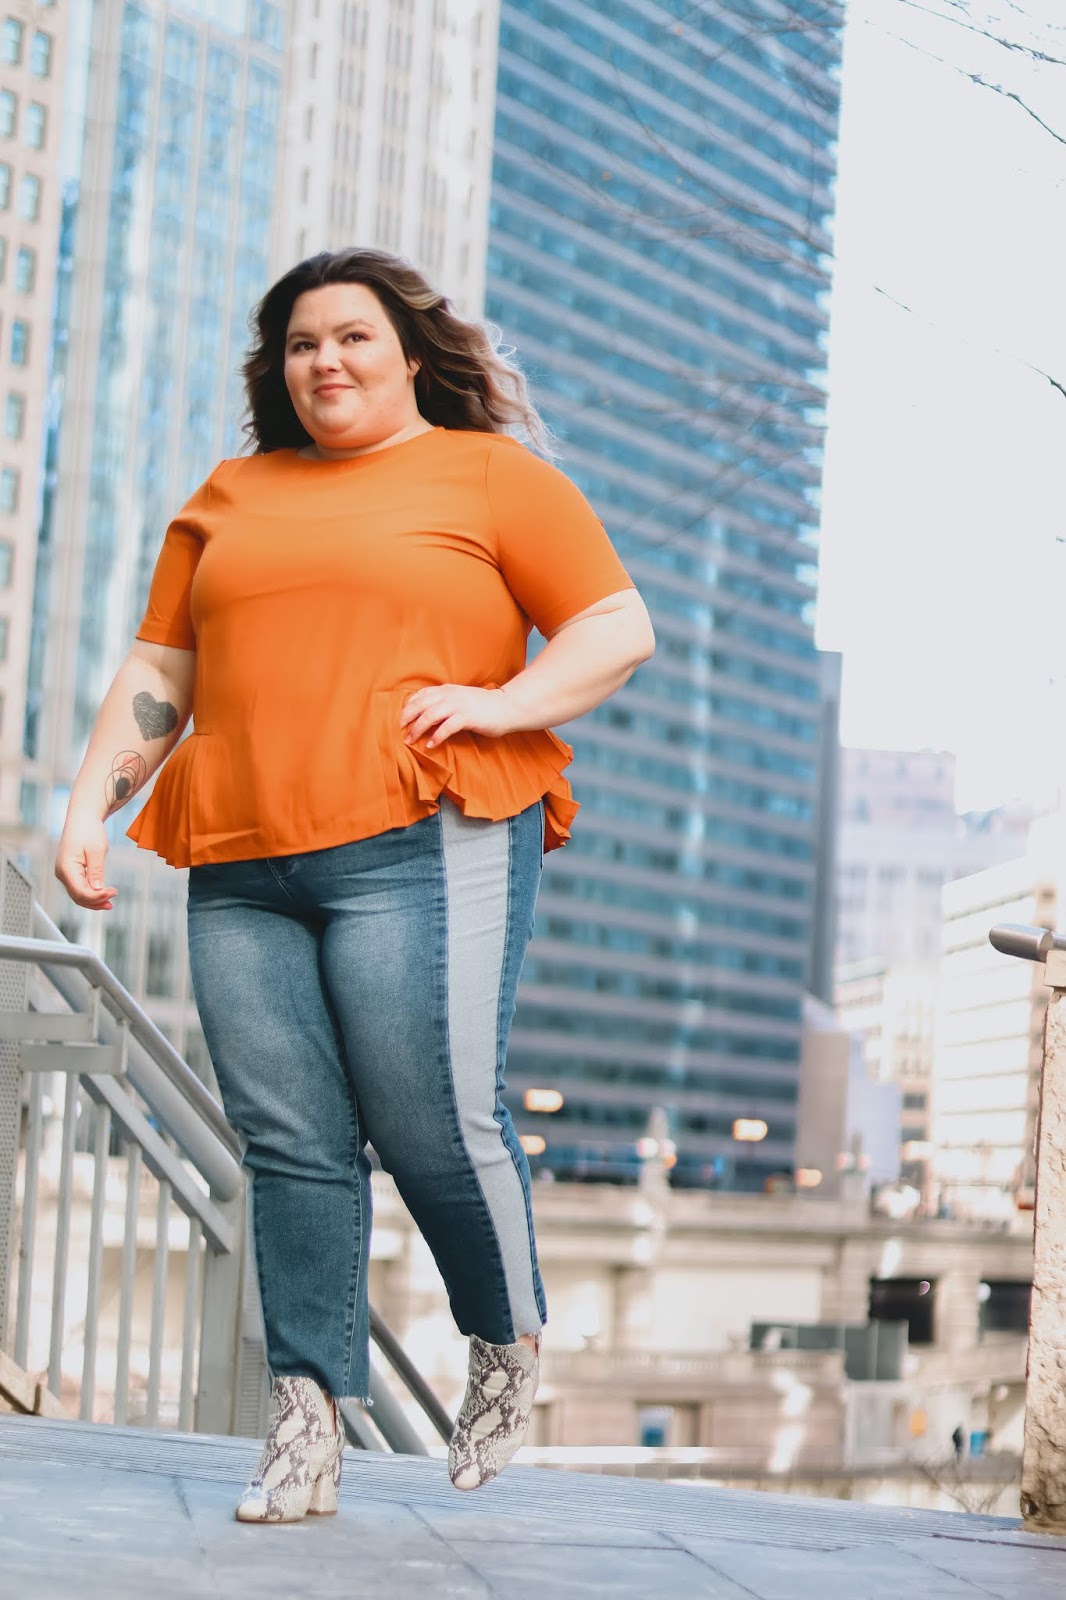 Chicago Plus Size Petite Fashion Blogger, influencer, YouTuber, and model Natalie Craig, of Natalie in the City, reviews Eloquii's pleated hem top and relaxed two-tone mom jeans.